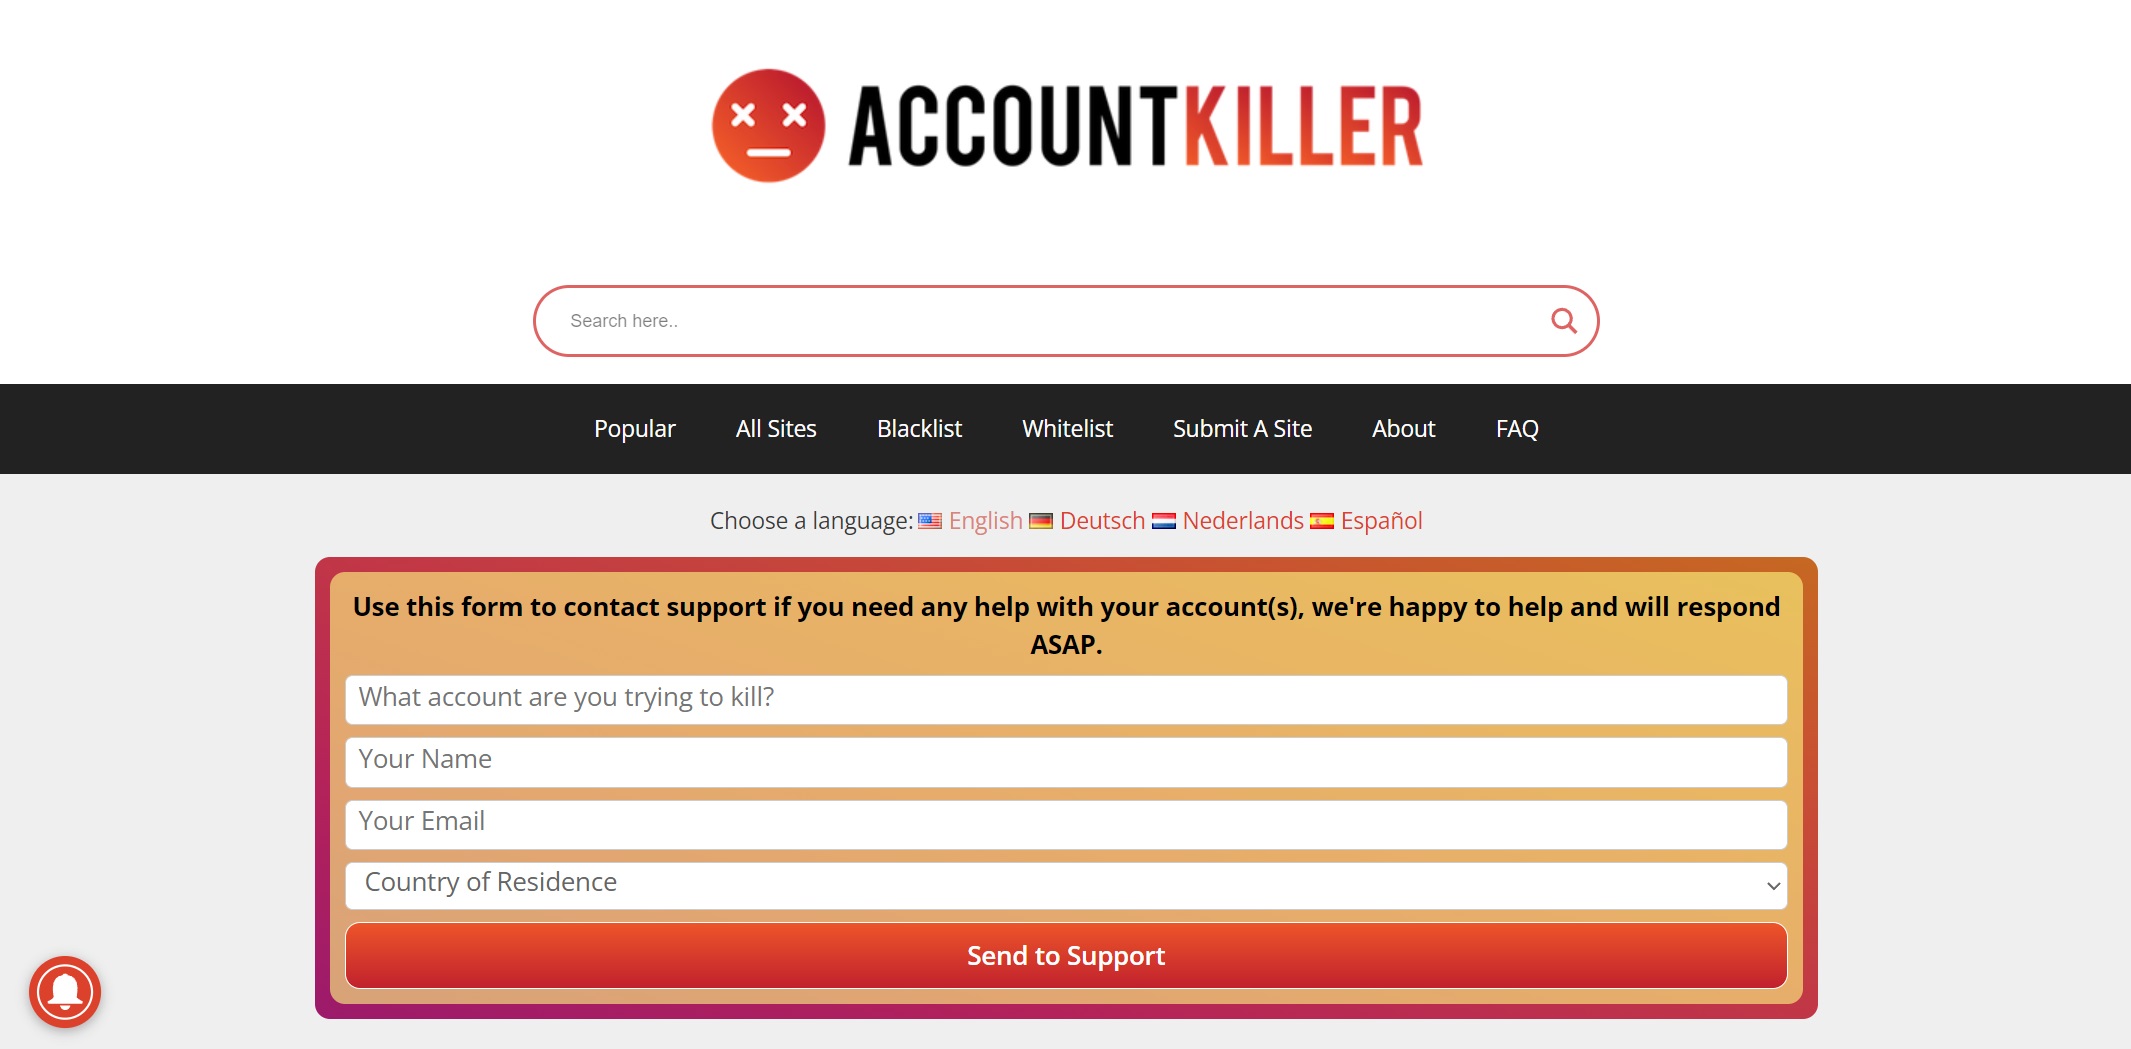 Accountkiller home page